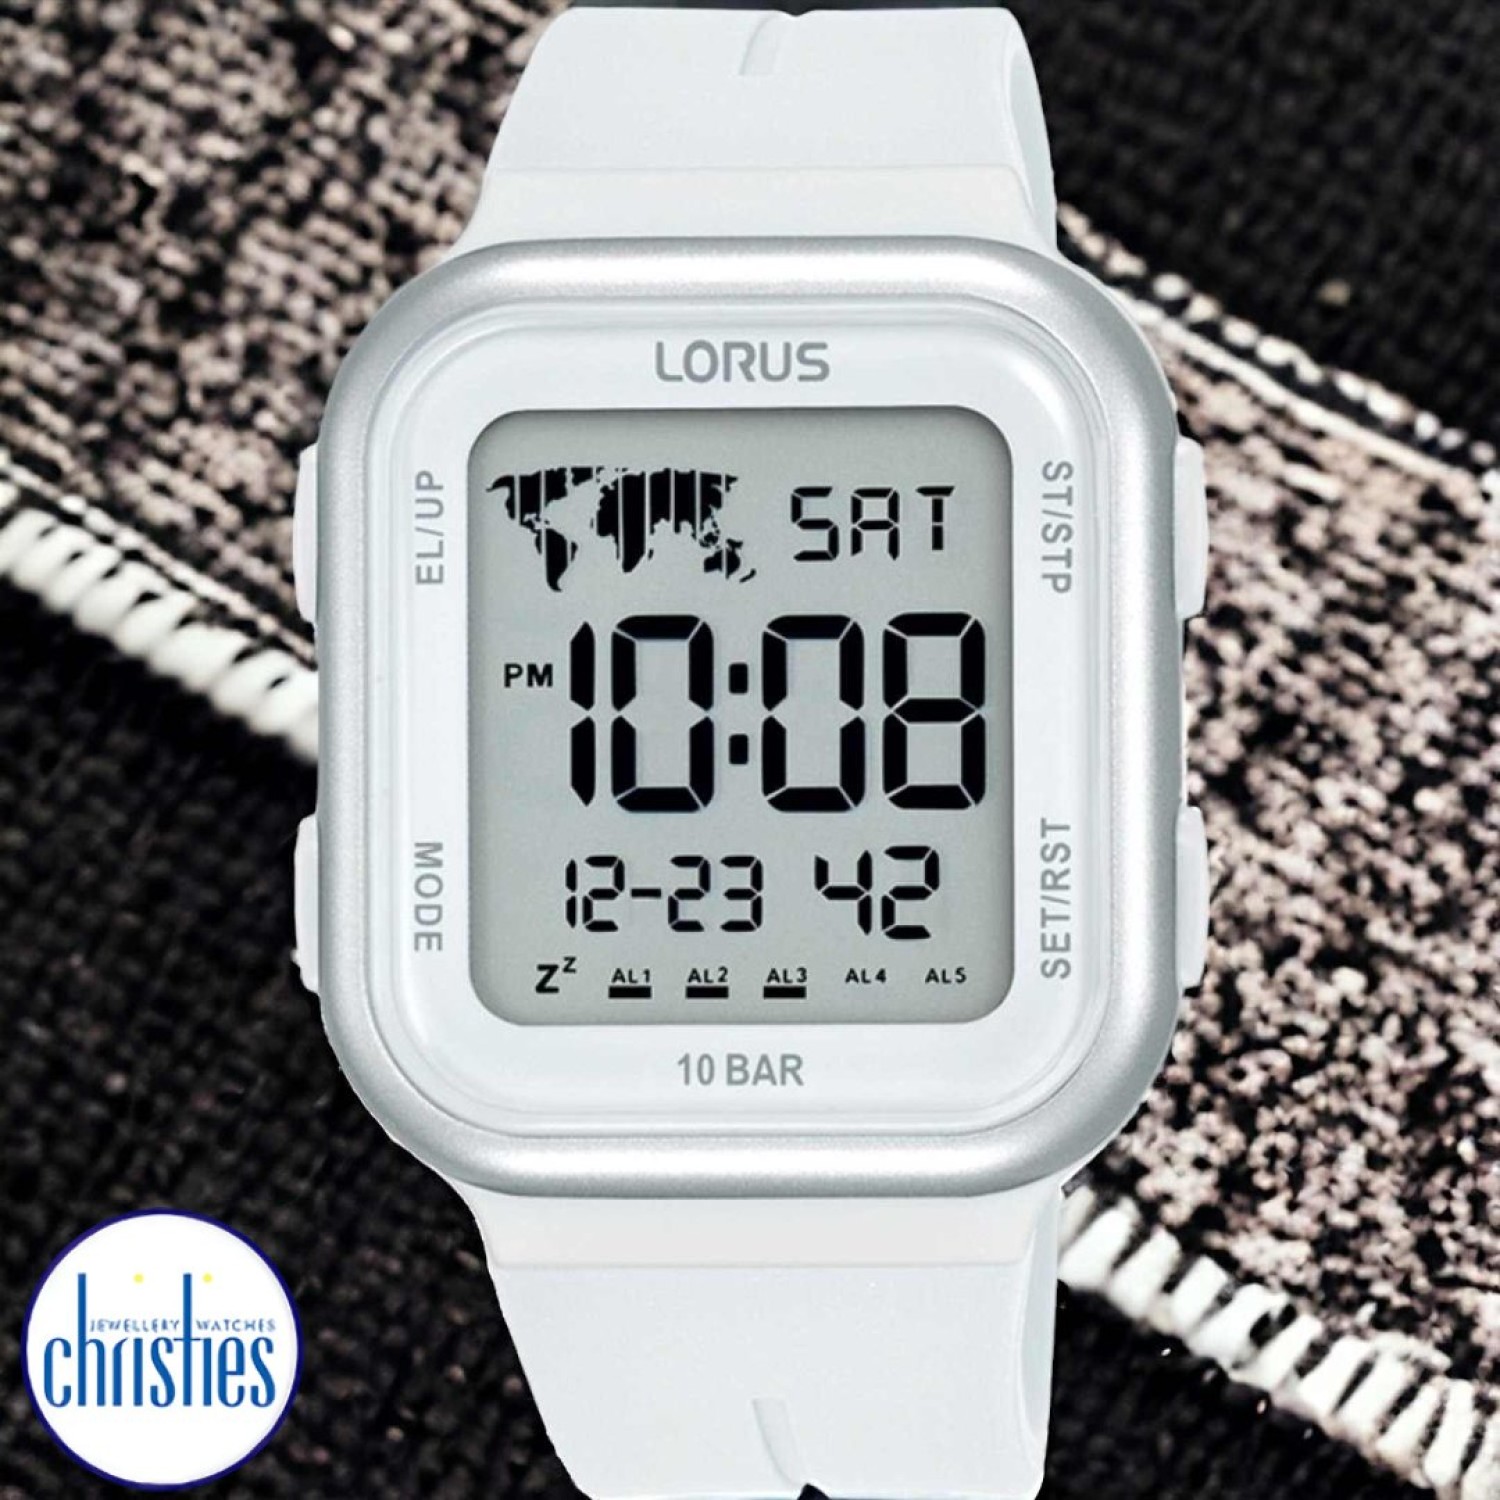 R2355PX-9 Lorus By Seiko Digital Watch R2355PX9 Lorus by Seiko Auckland s offers a diverse range of watch styles, including analog, digital, sports, and dress watches